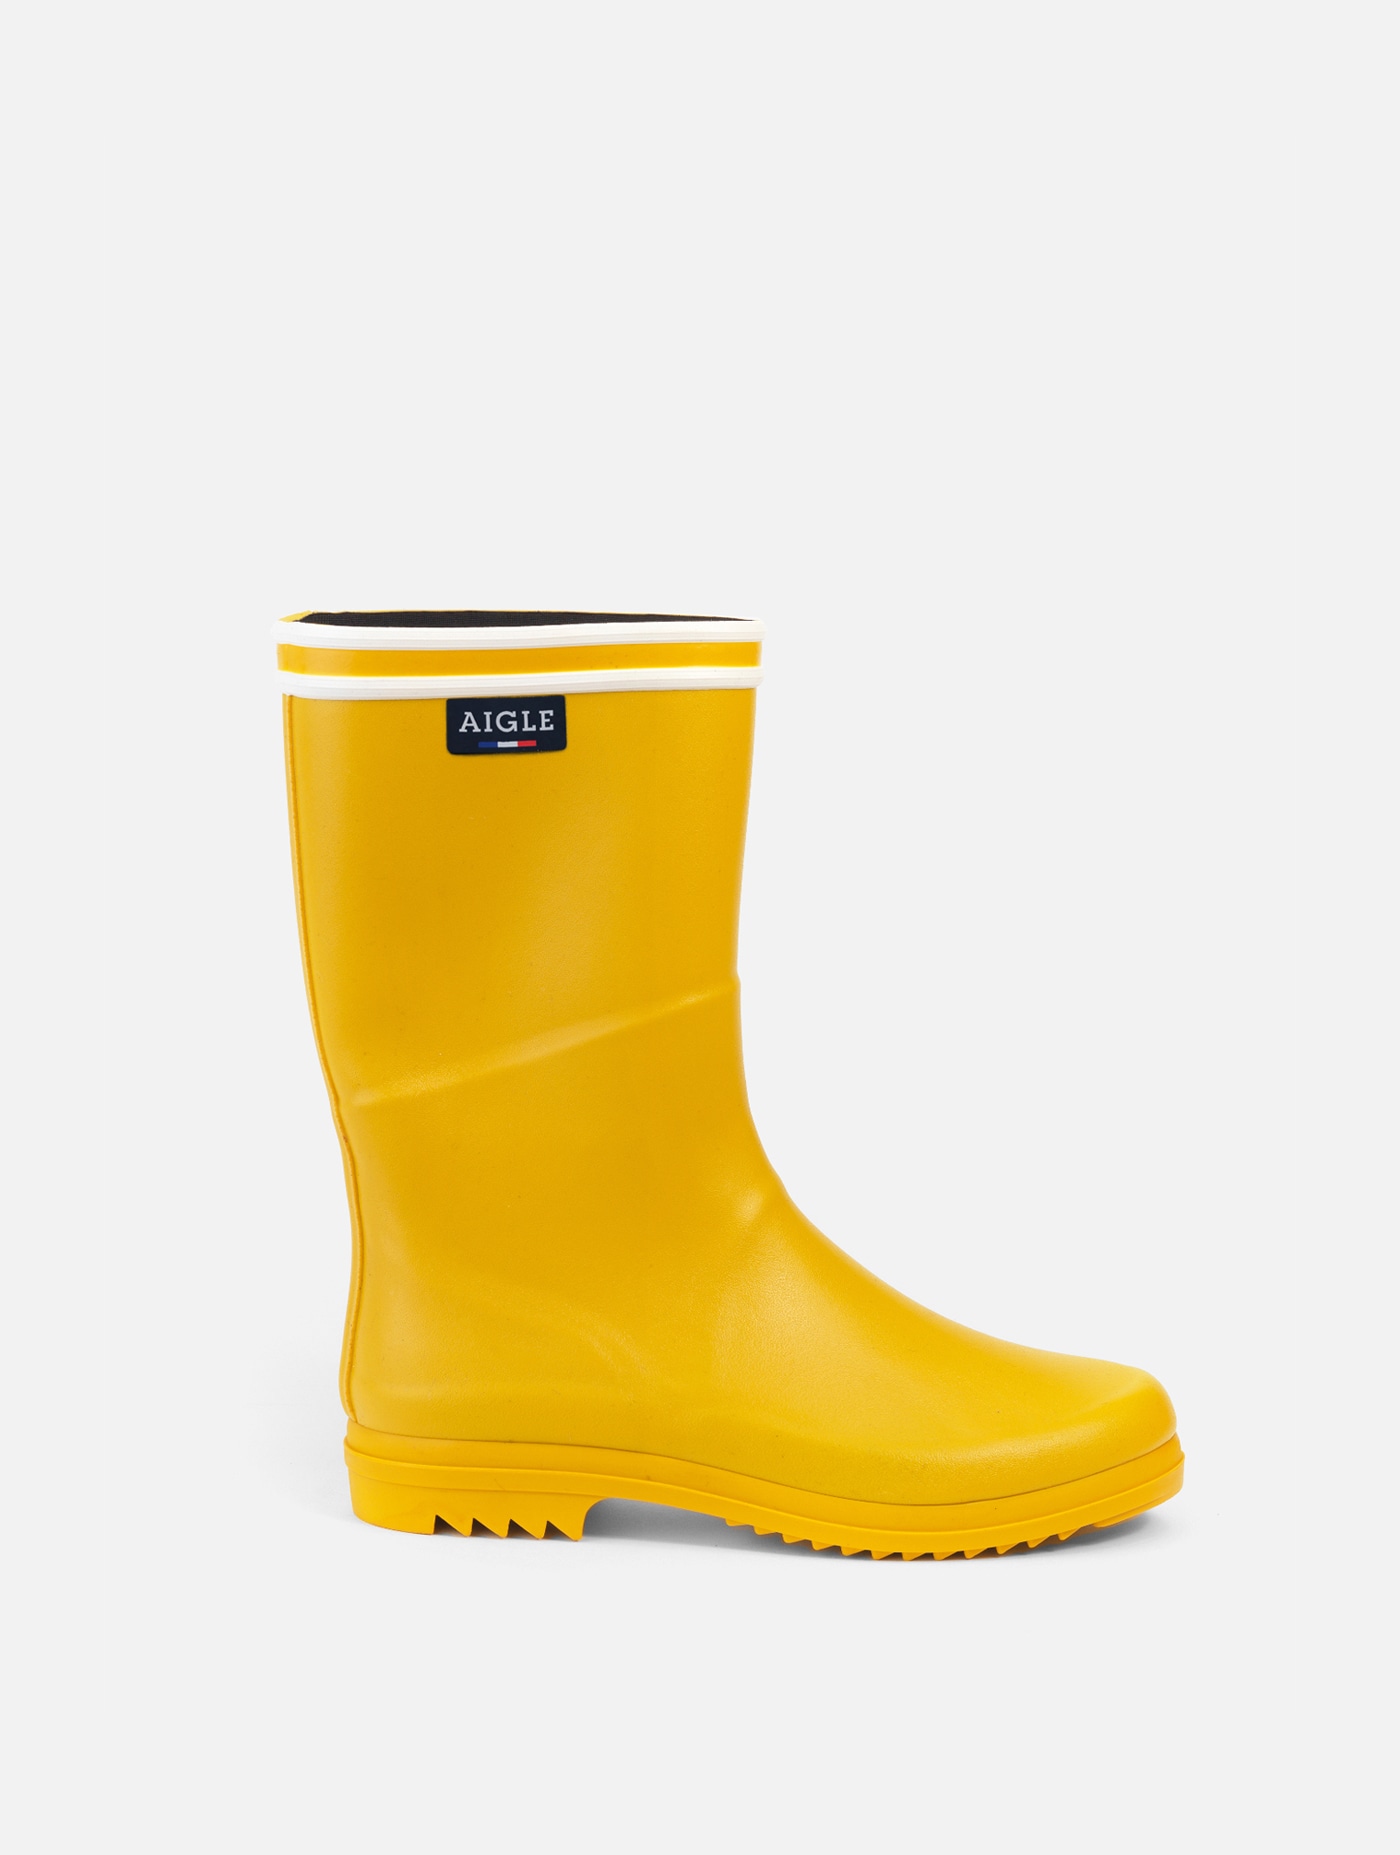 Aigle Rain boots with notched sol, Made in France Noir - Chanteboot stripeswomen | AIGLE